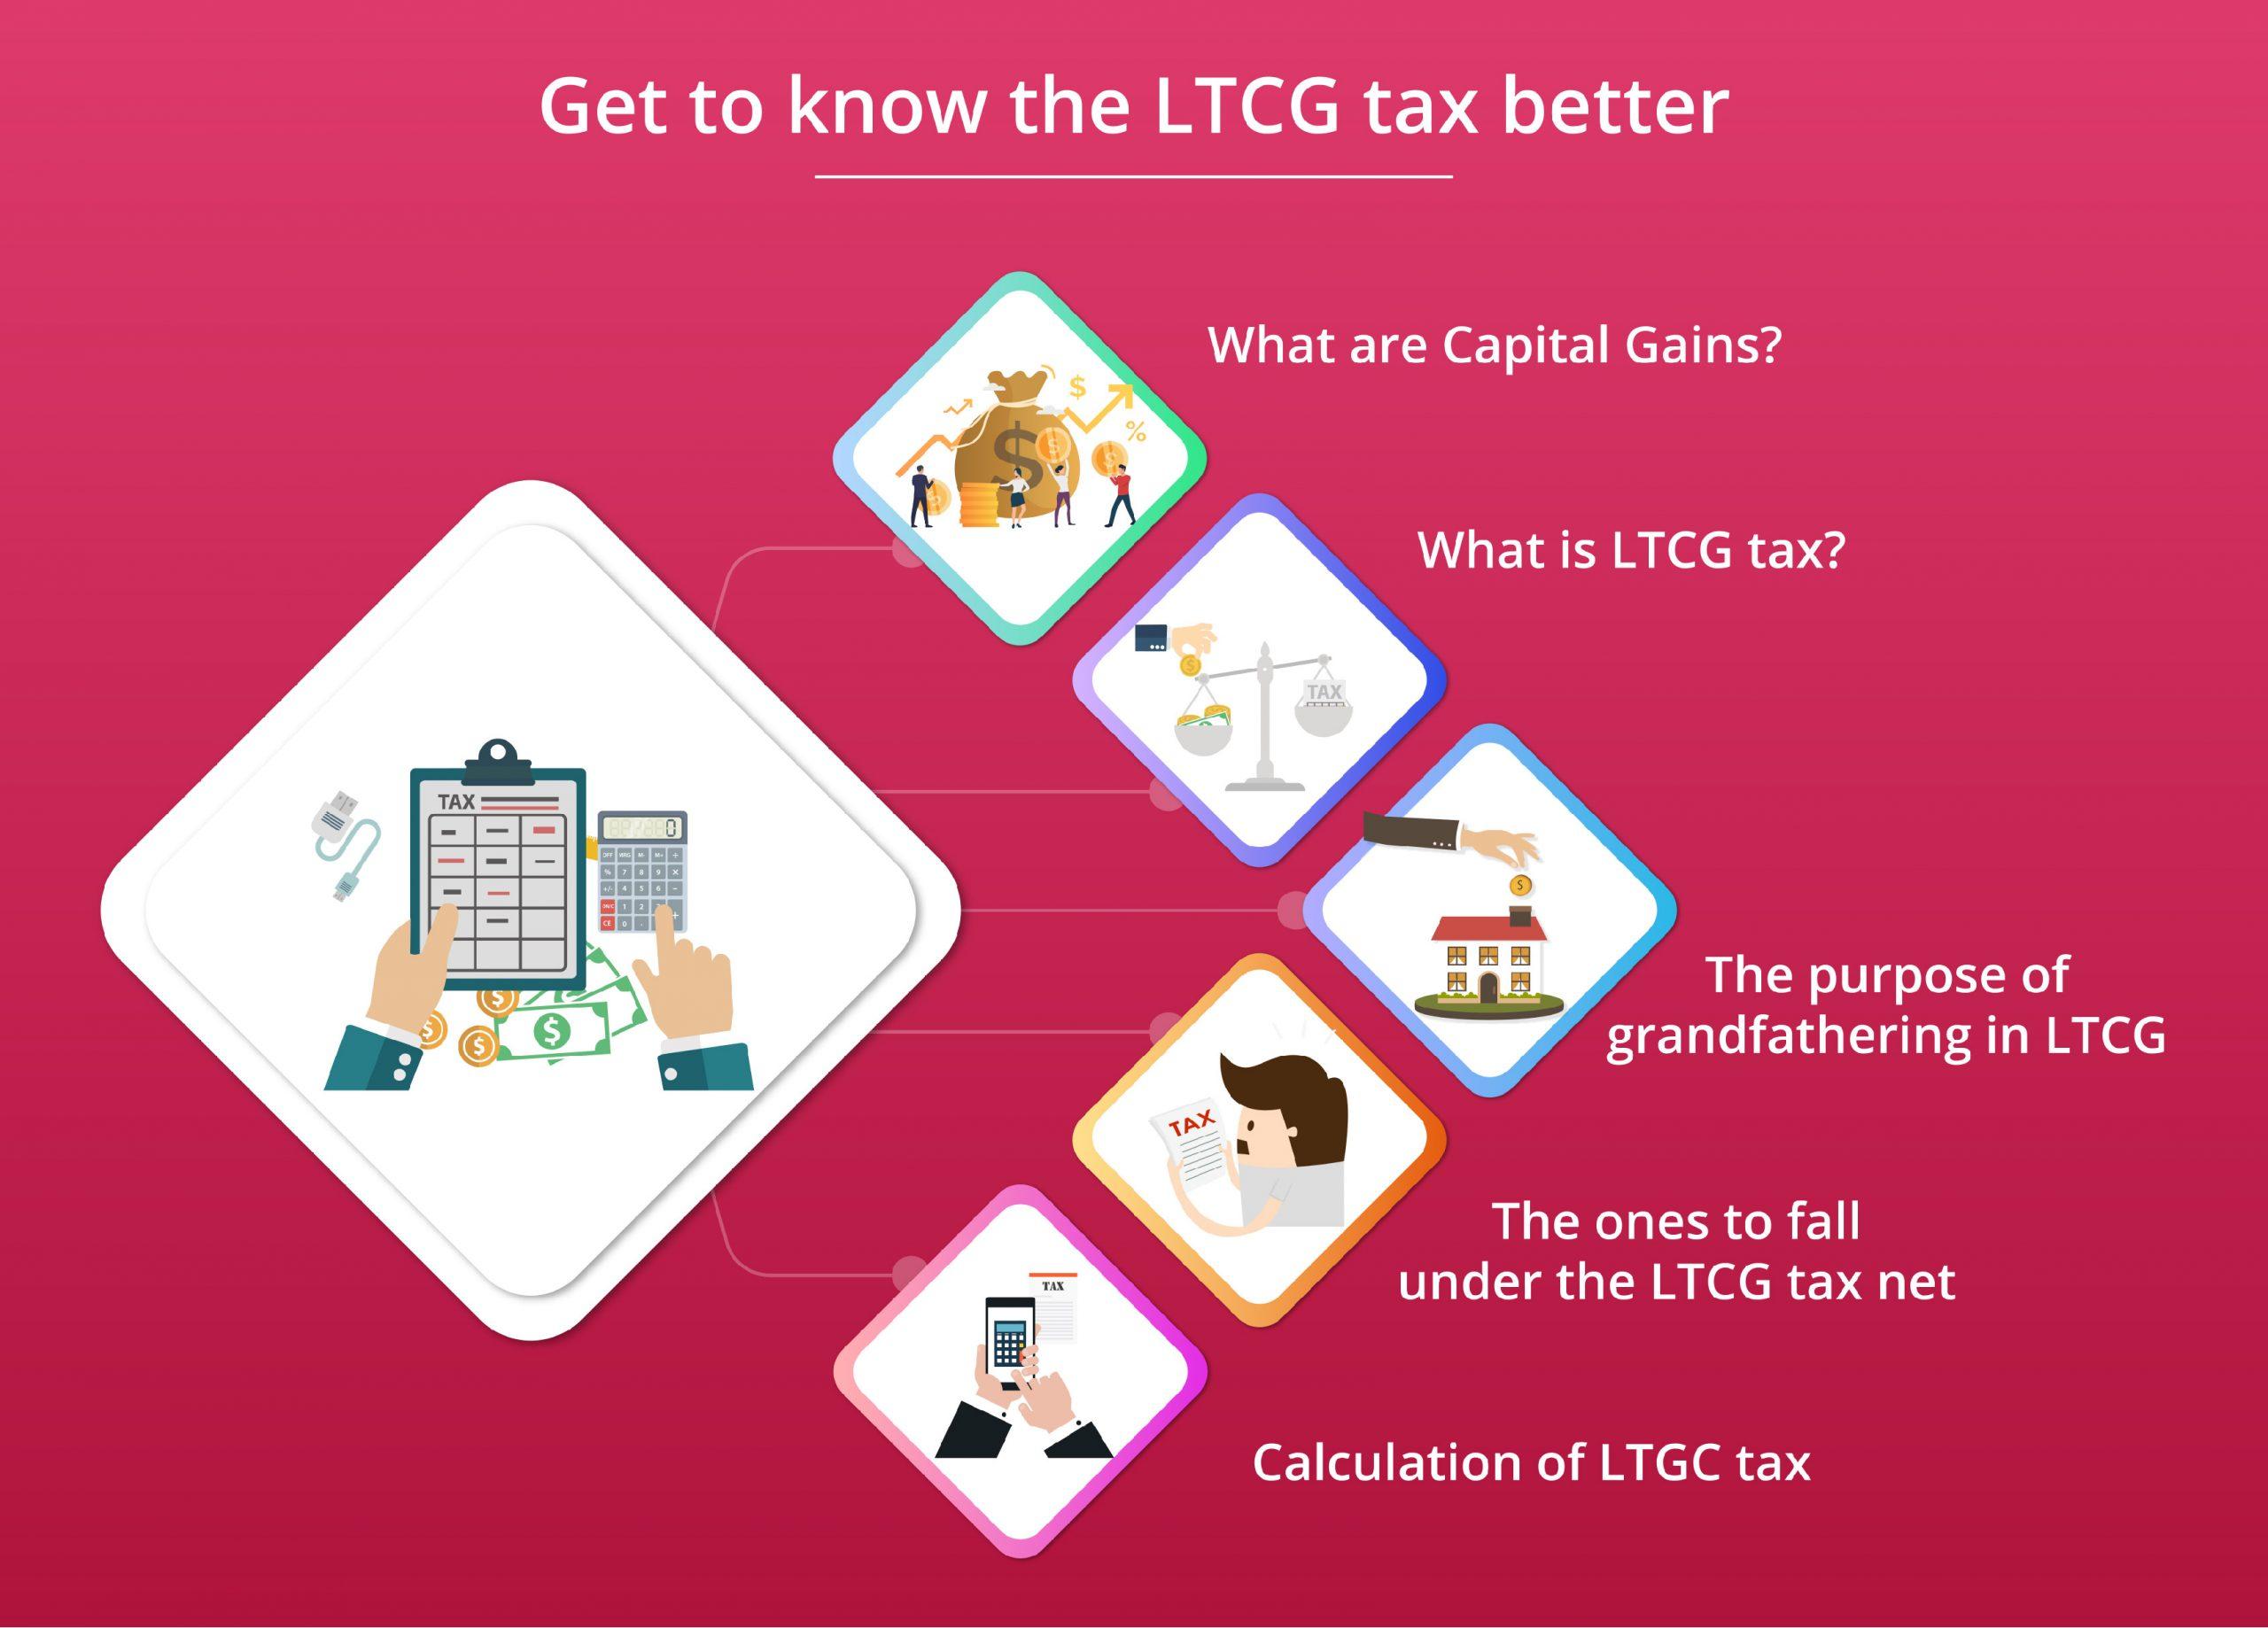 Get to know the LTCG tax better